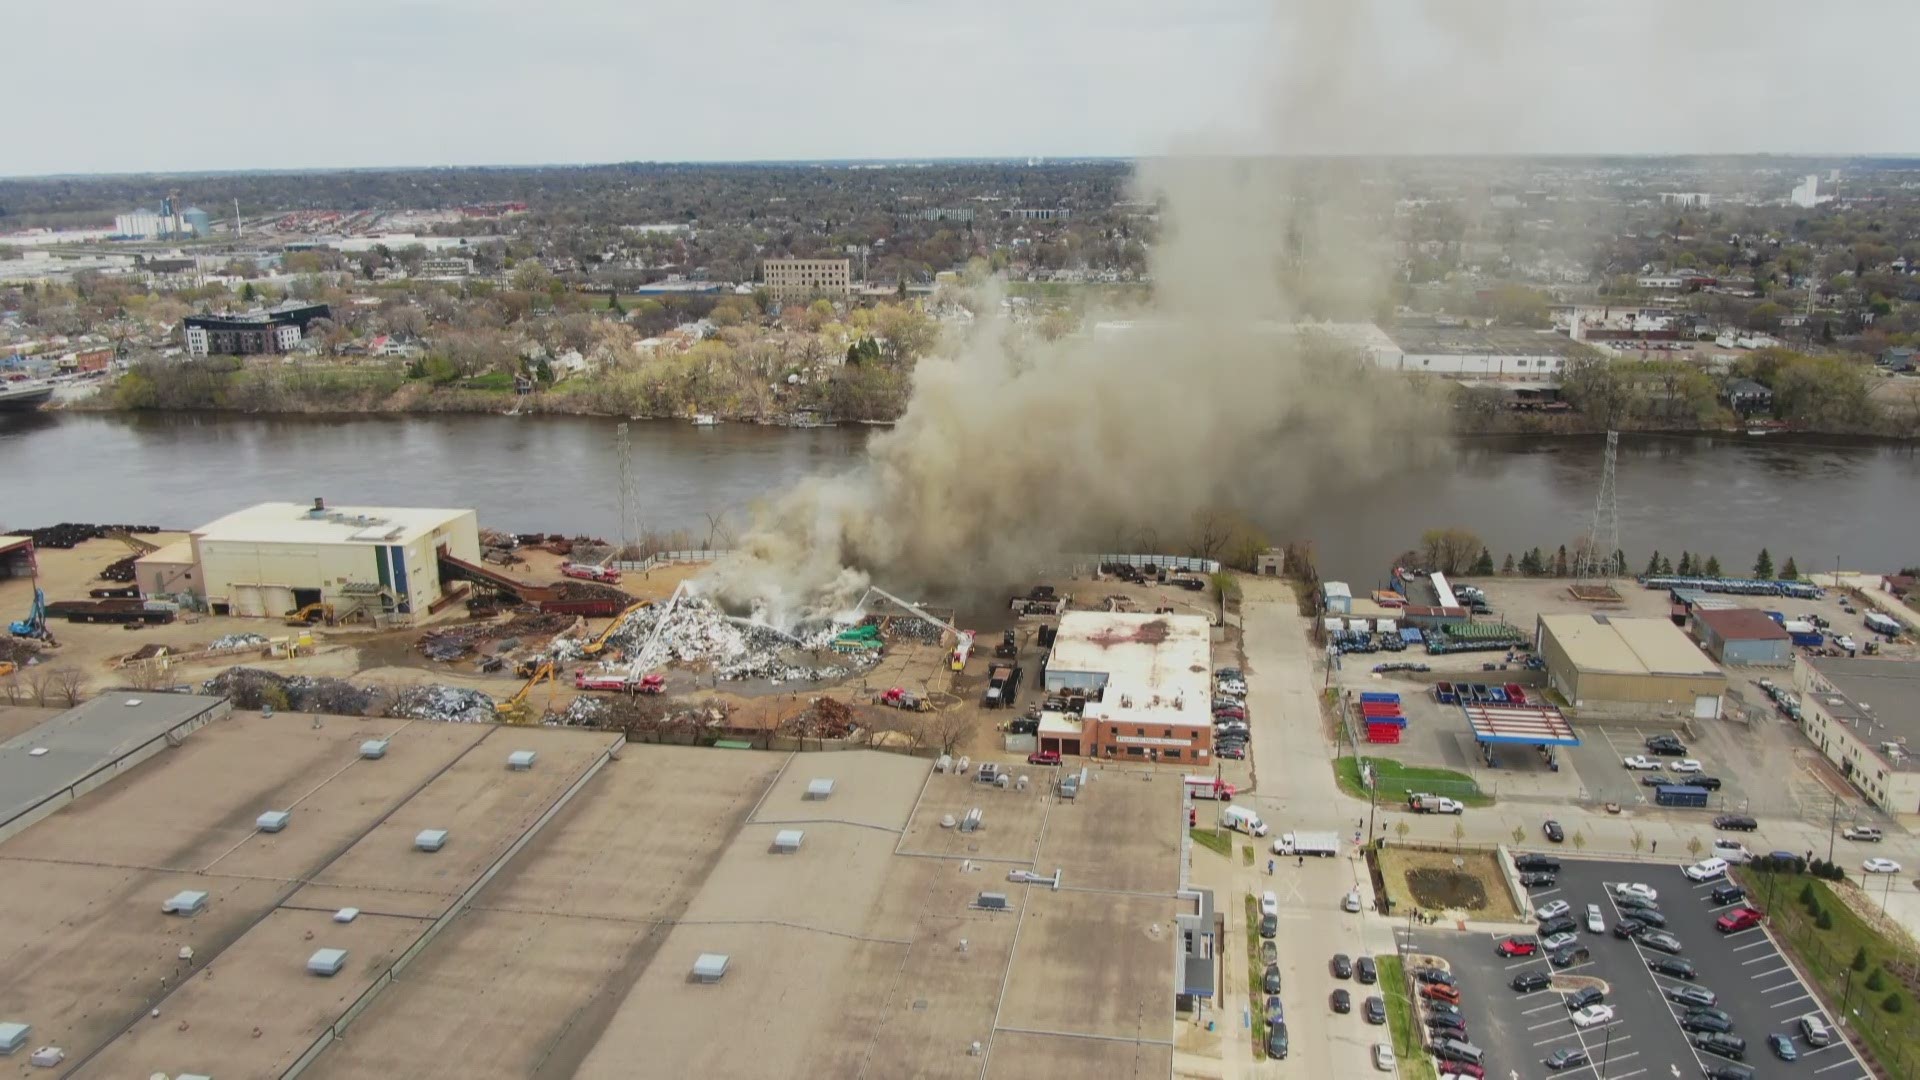 Minneapolis fire crews have their hands full with a smoky scrap and rubbish fire at Northern Metals near the Mississippi River.